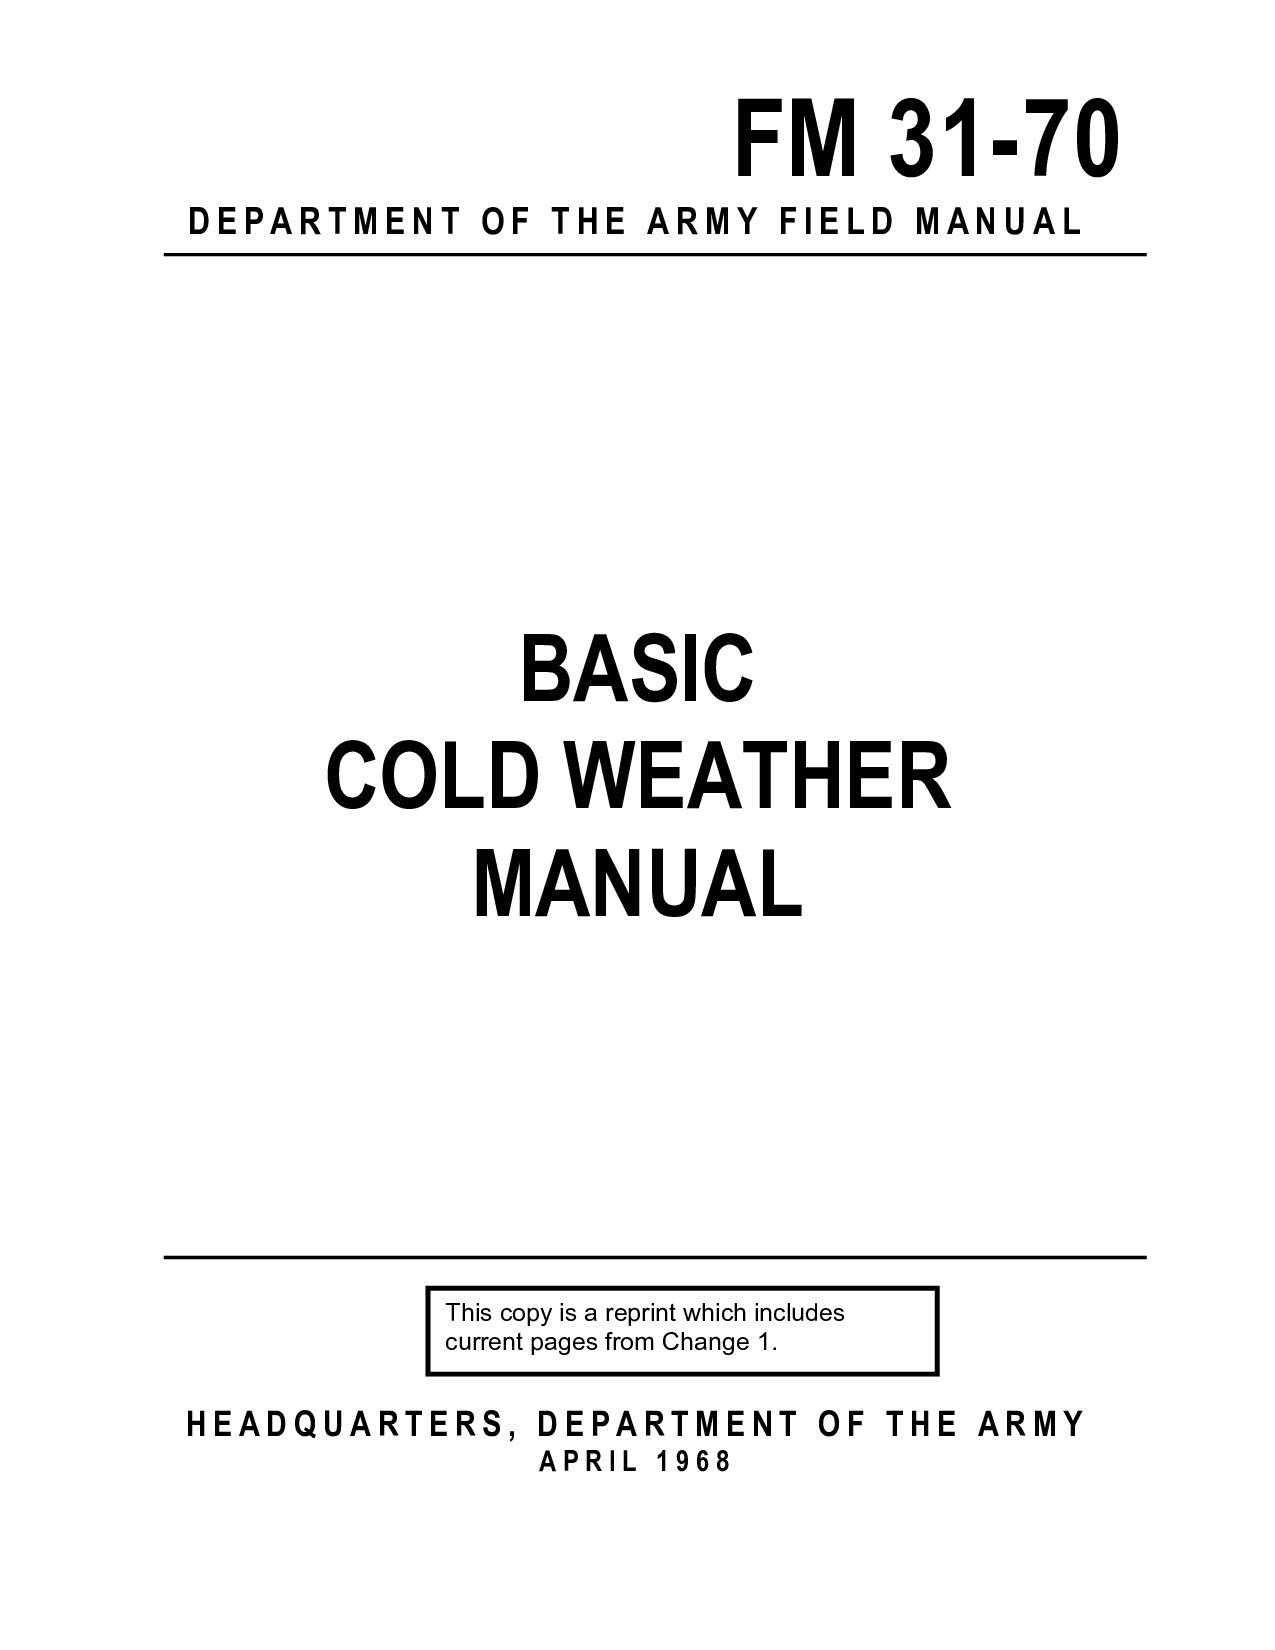 Basic Cold Weather Manual